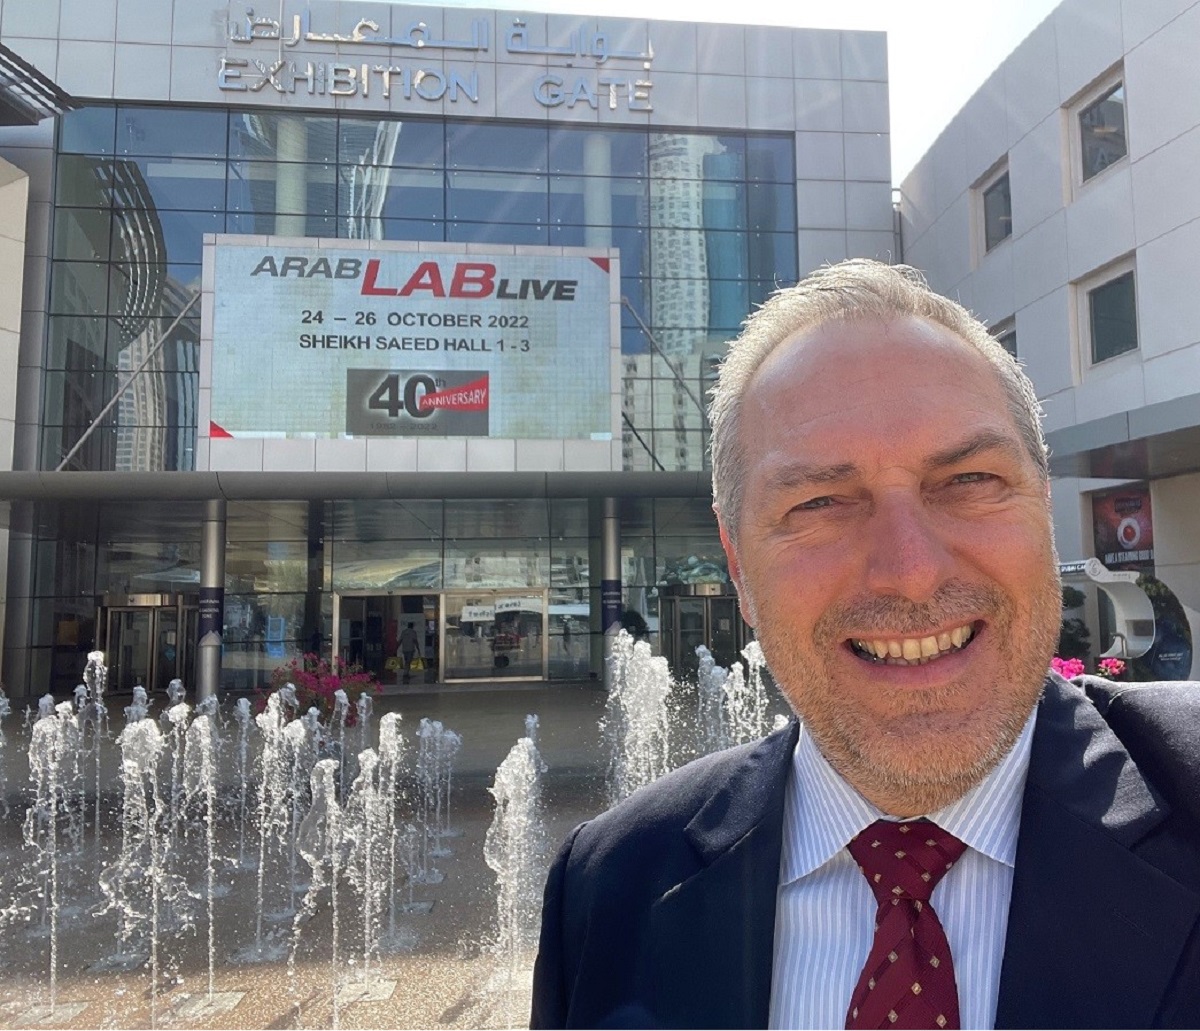 Meet our CEO Manfred Detterbeck @Arablab 2022 in Dubai this week and discuss the many applications that are possible using our #AFMprobes for #AtomicForceMicroscopy